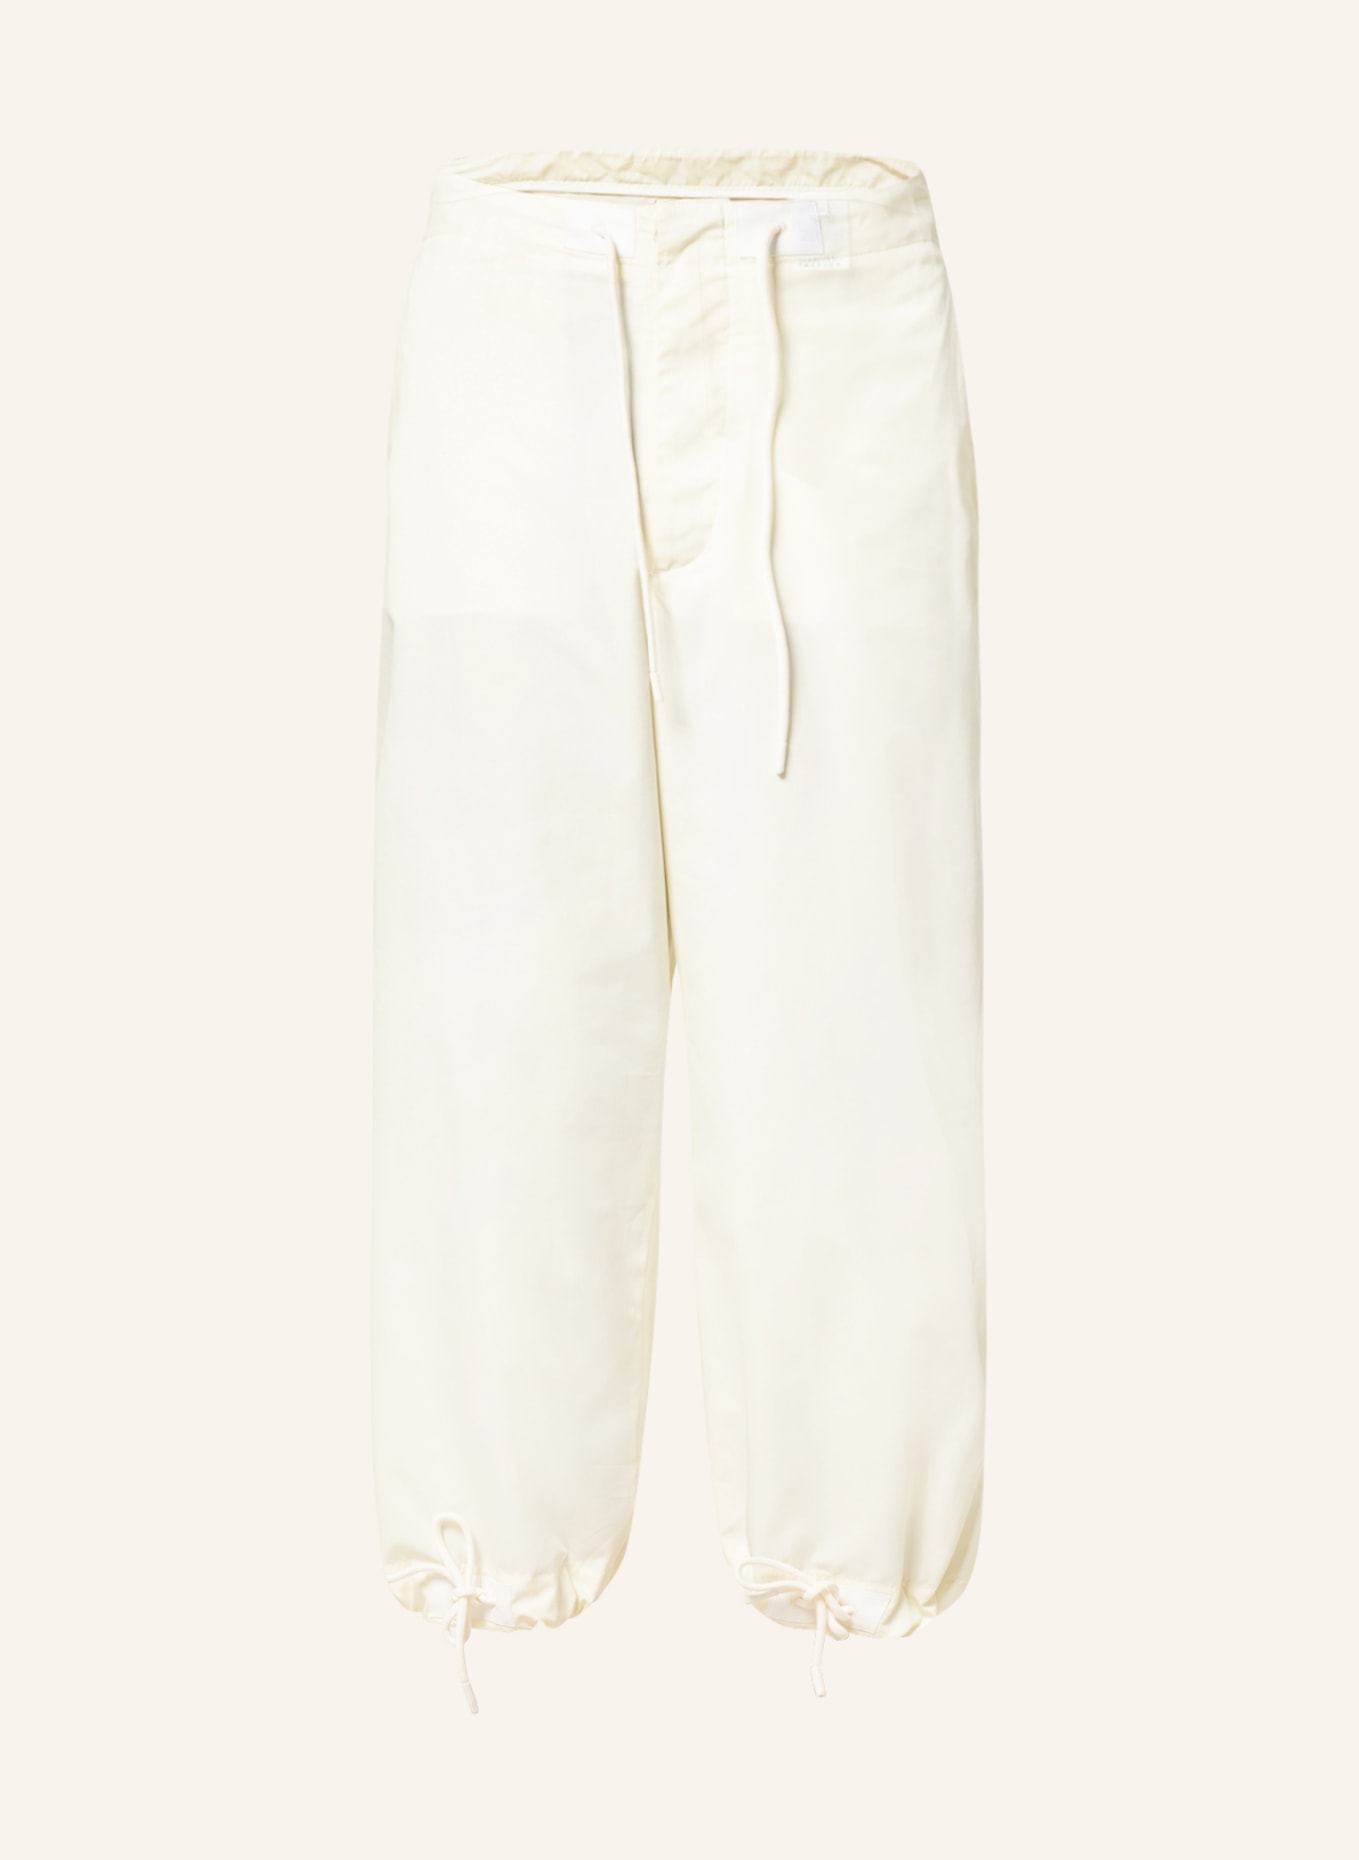 MONCLER GENIUS Trousers in jogger style, Color: ECRU (Image 1)